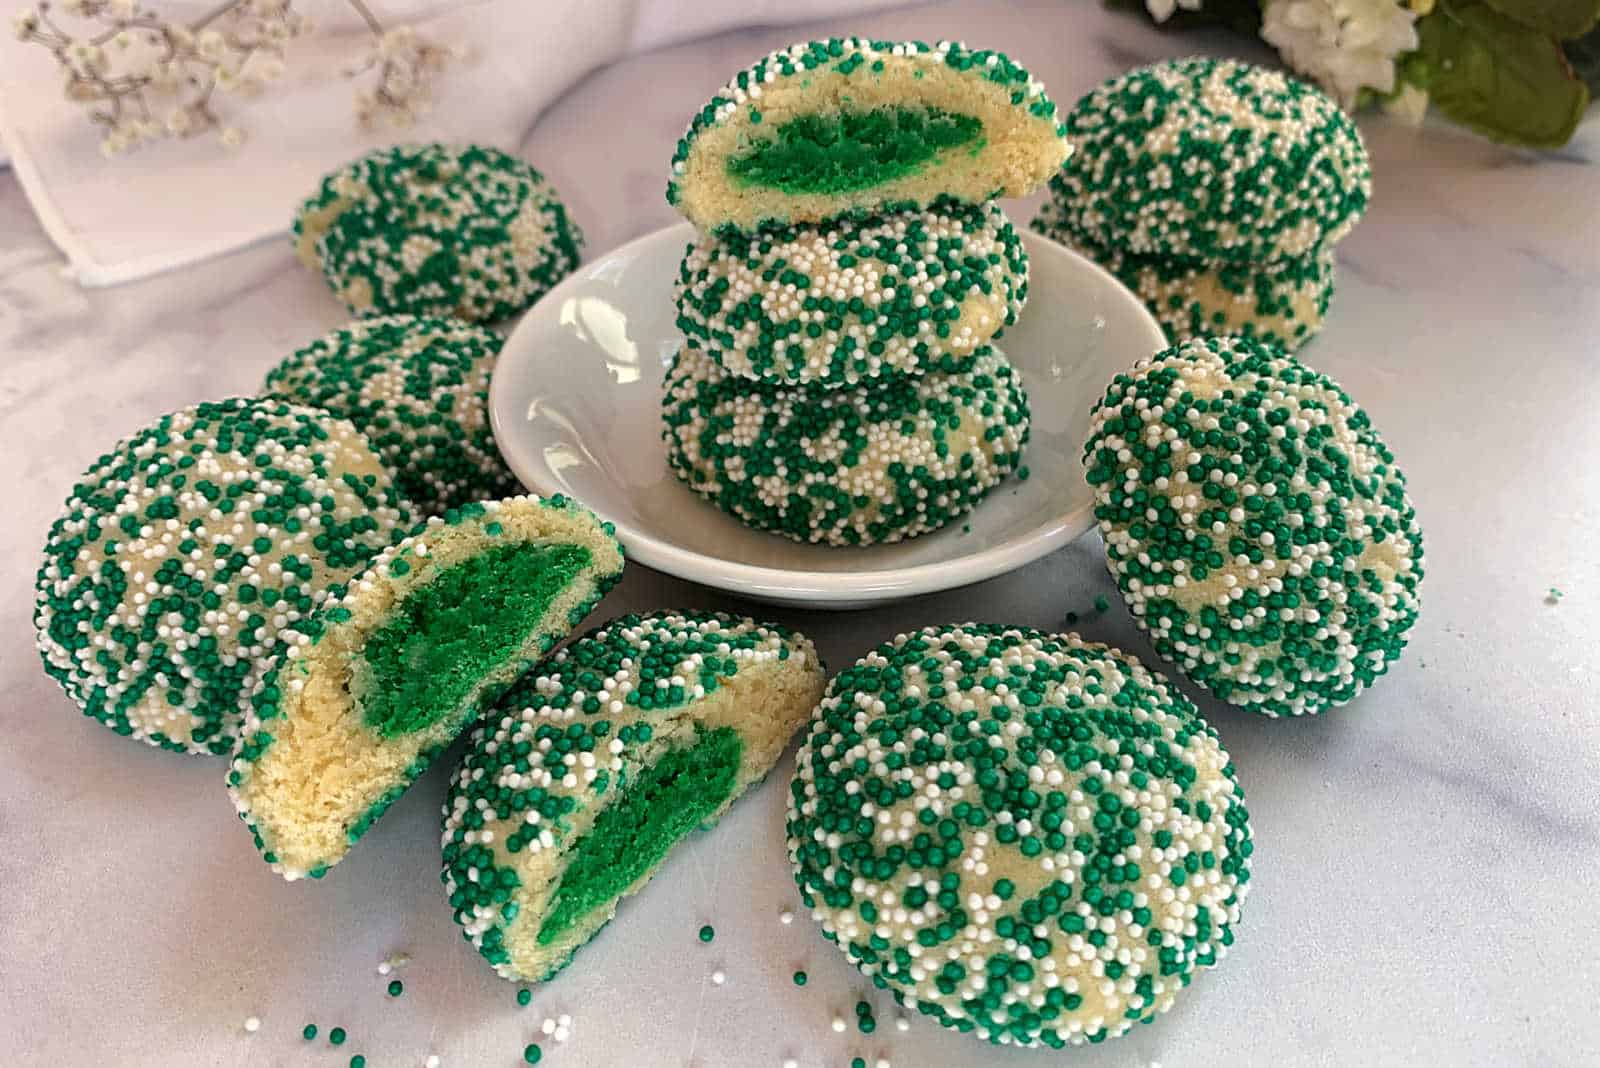 A plate of green and white sprinkled cookies, some cut in half to show green centers, next to a cup of tea on a table with a lacy placemat.